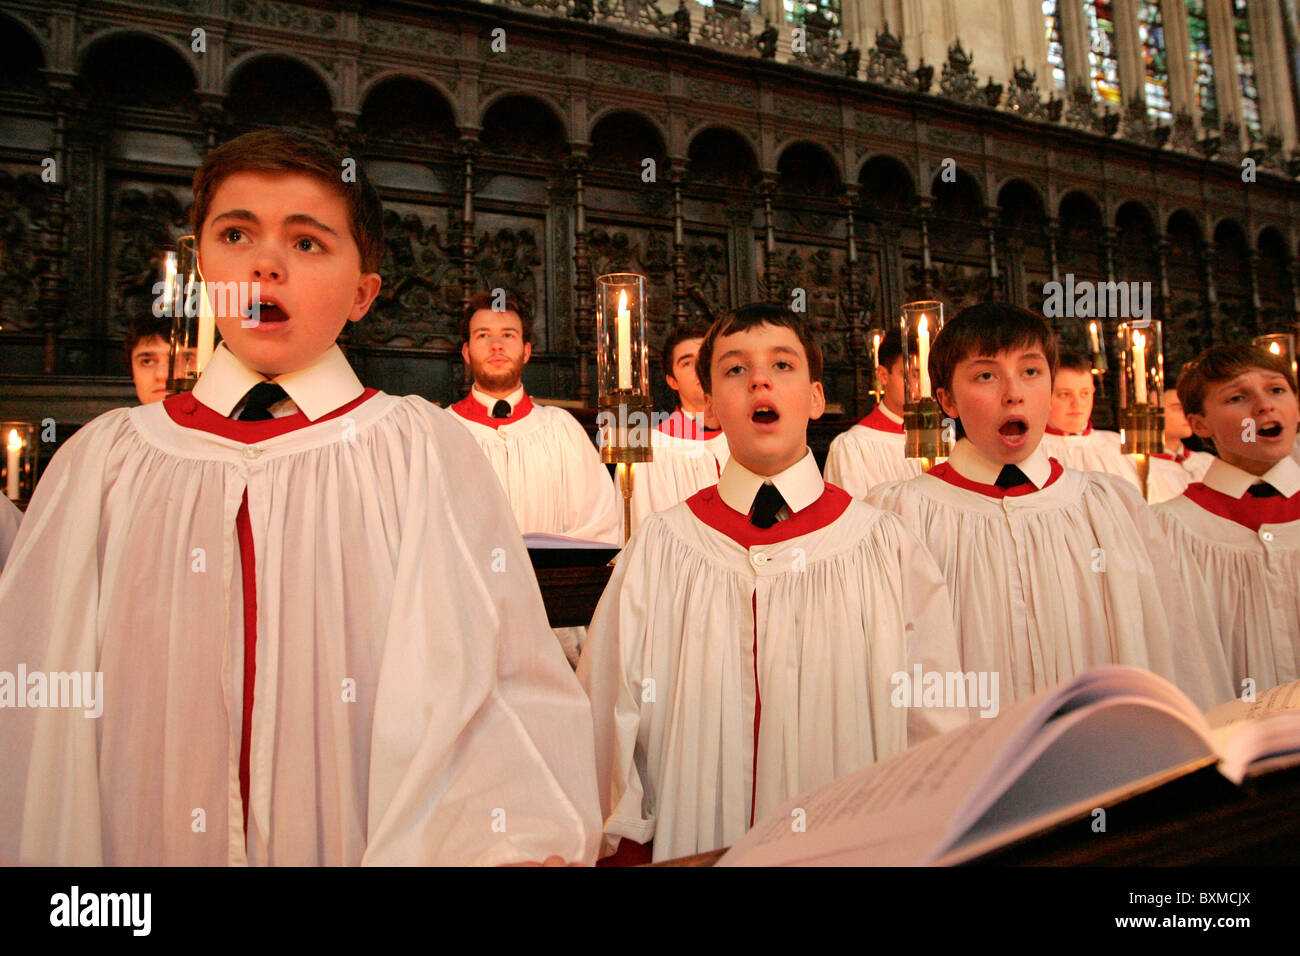 THE KINGS COLLEGE CHOIR IN CAMBRIDGE REHEARSING FOR THE CHRISTMAS EVE